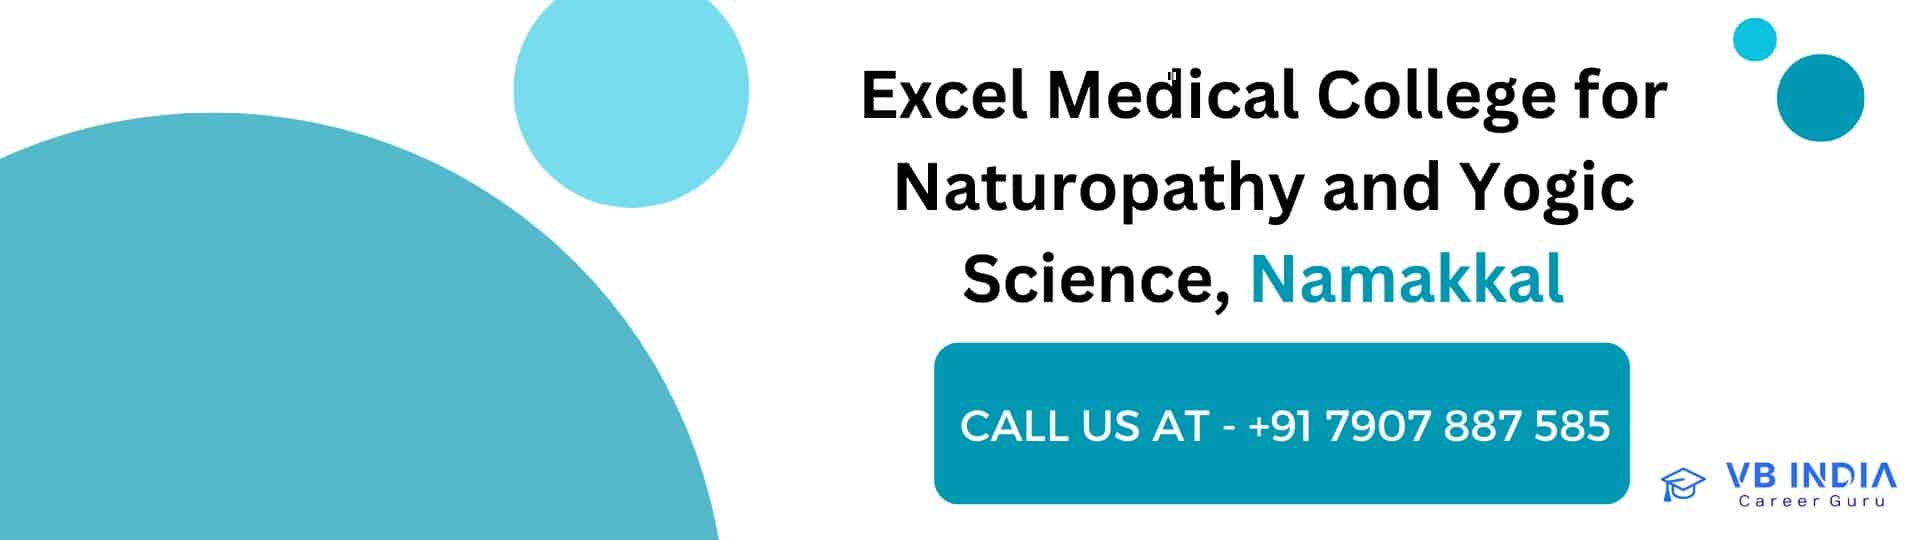 Excel Medical College for Naturopathy and Yogic Science Namakkal